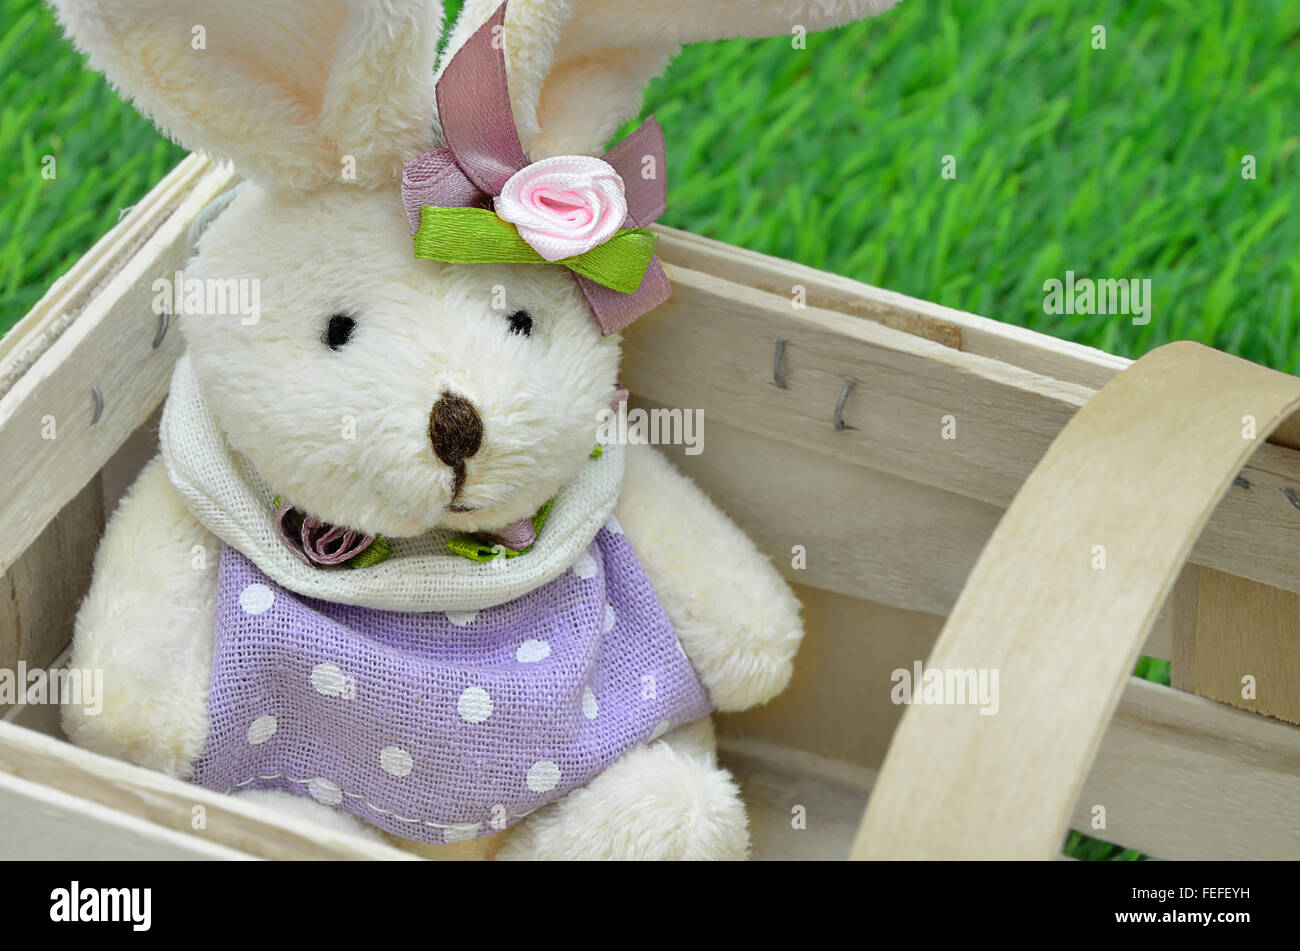 close up of an Easter bunny, female with purple dress,  sitting in a basket, outside on green grass, horizontal, full frame Stock Photo